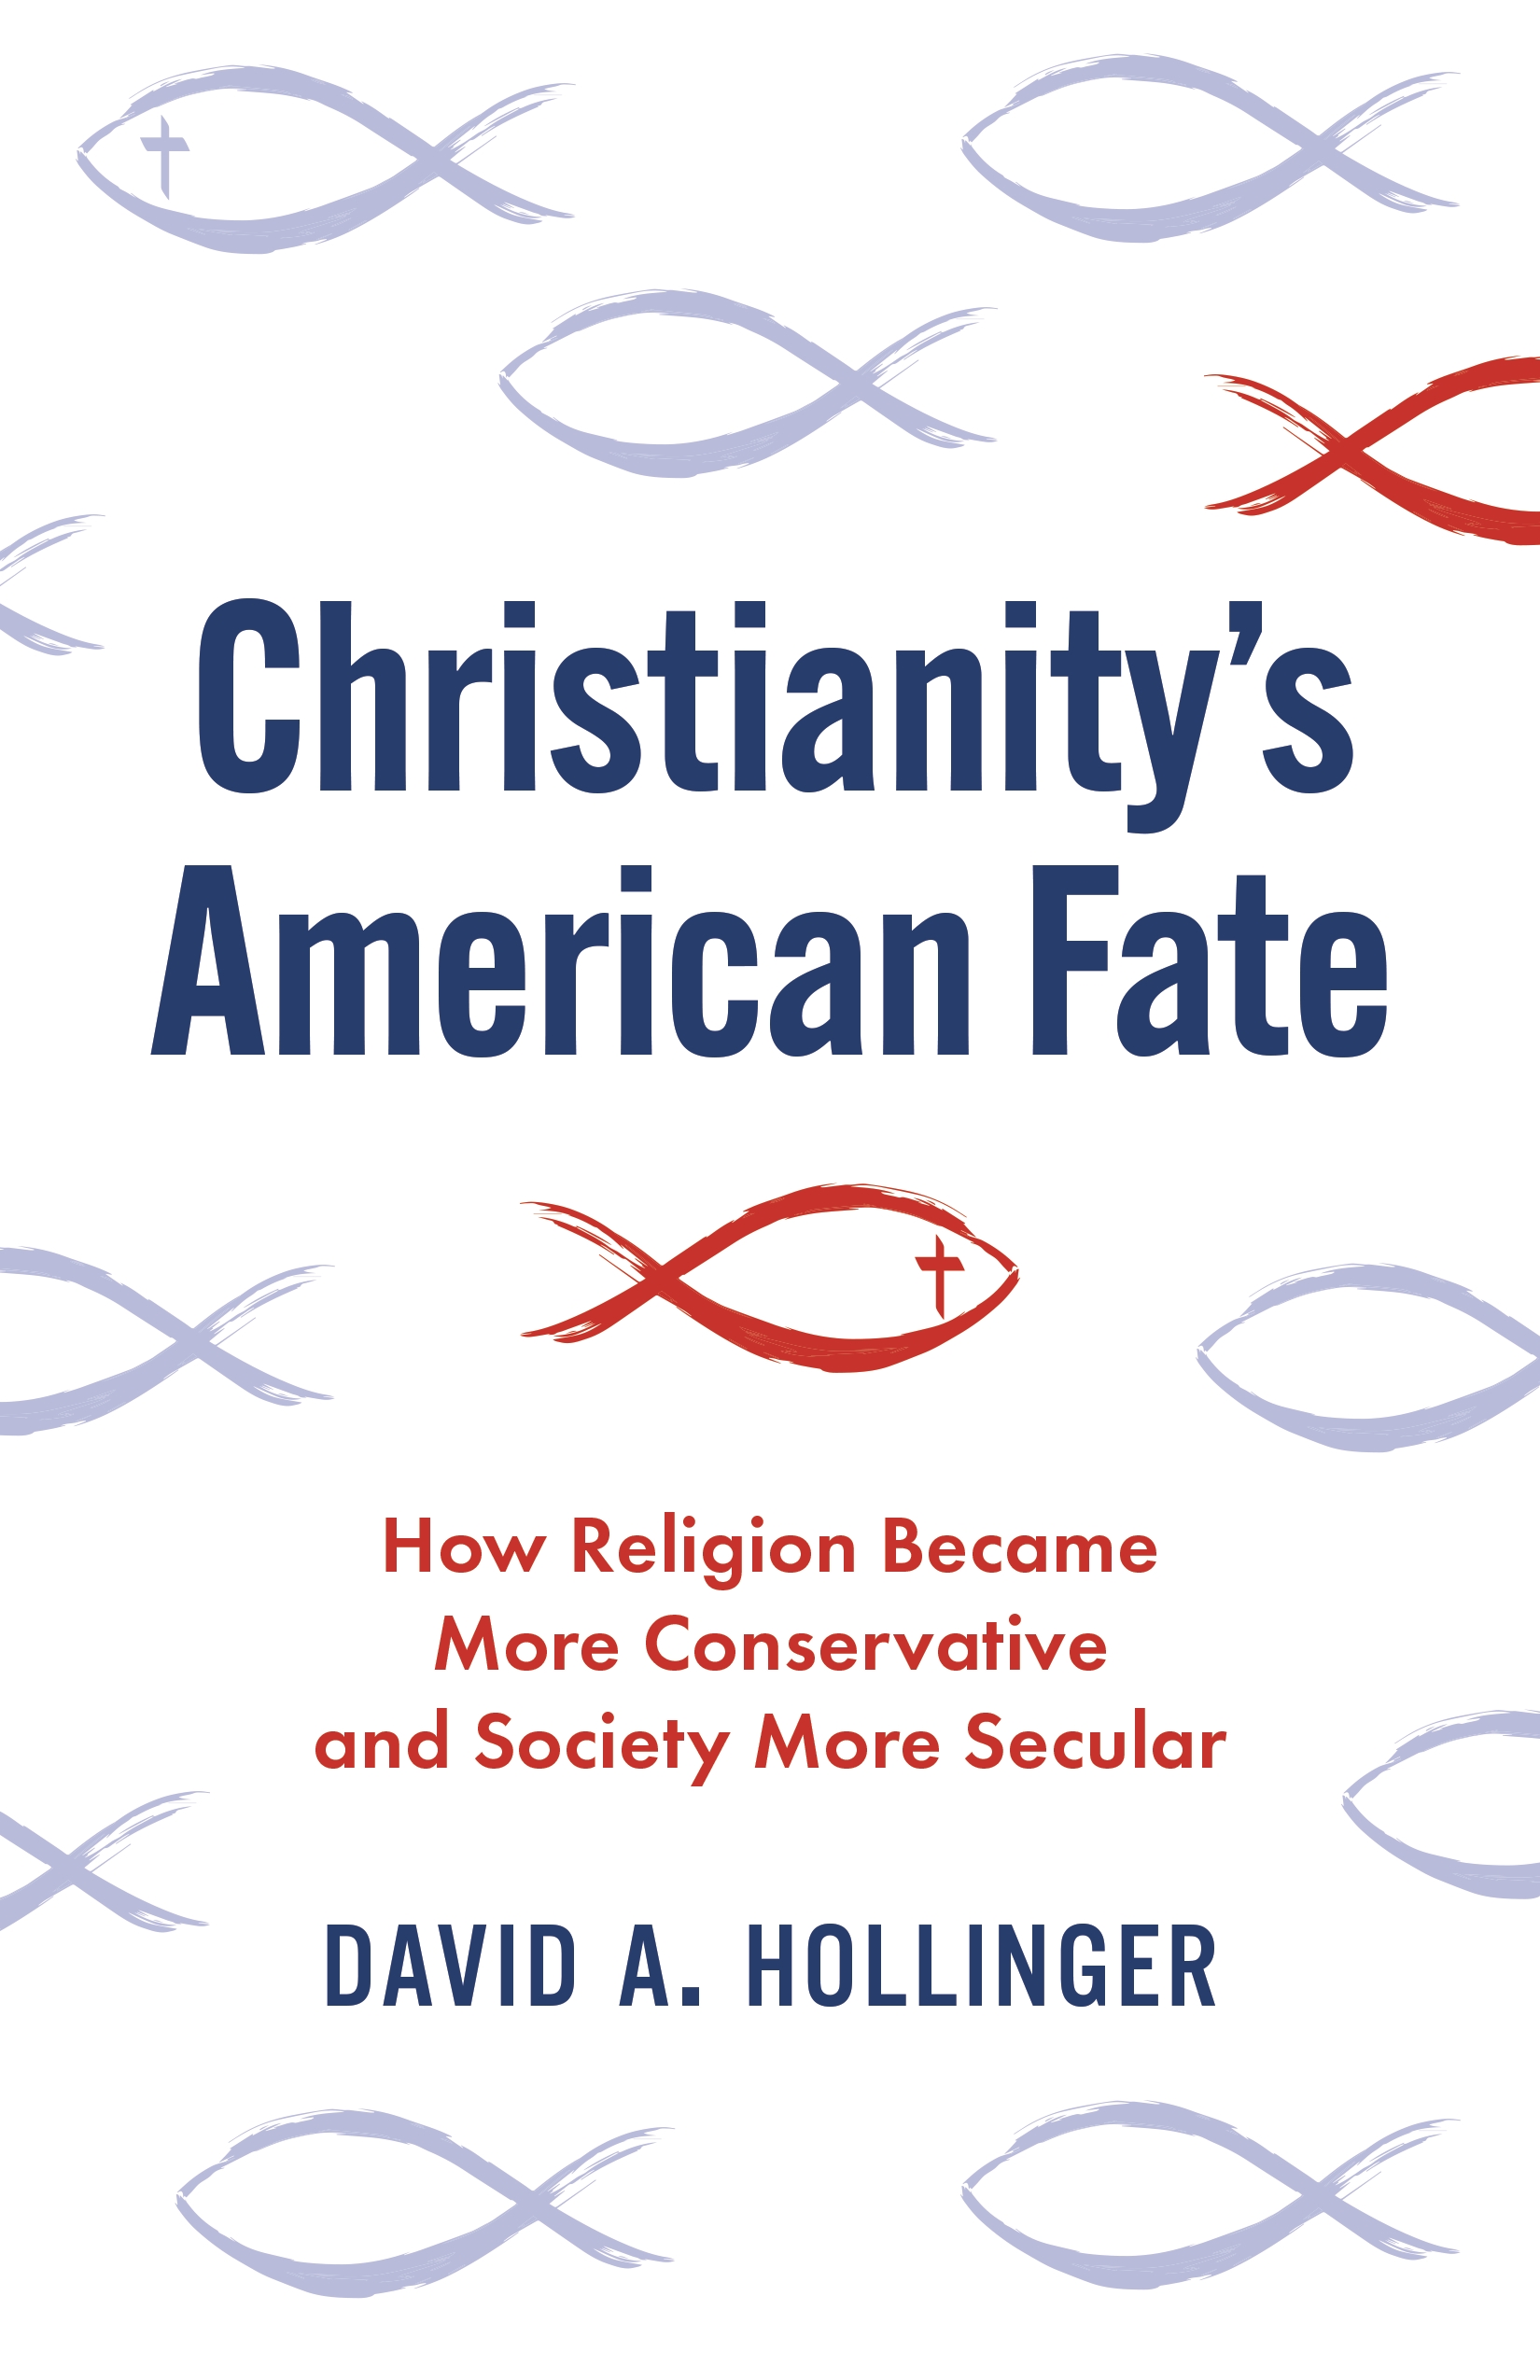 Christianity's American Fate: How Religion Became More Conservative and Society More Secular by David A. Hollinger